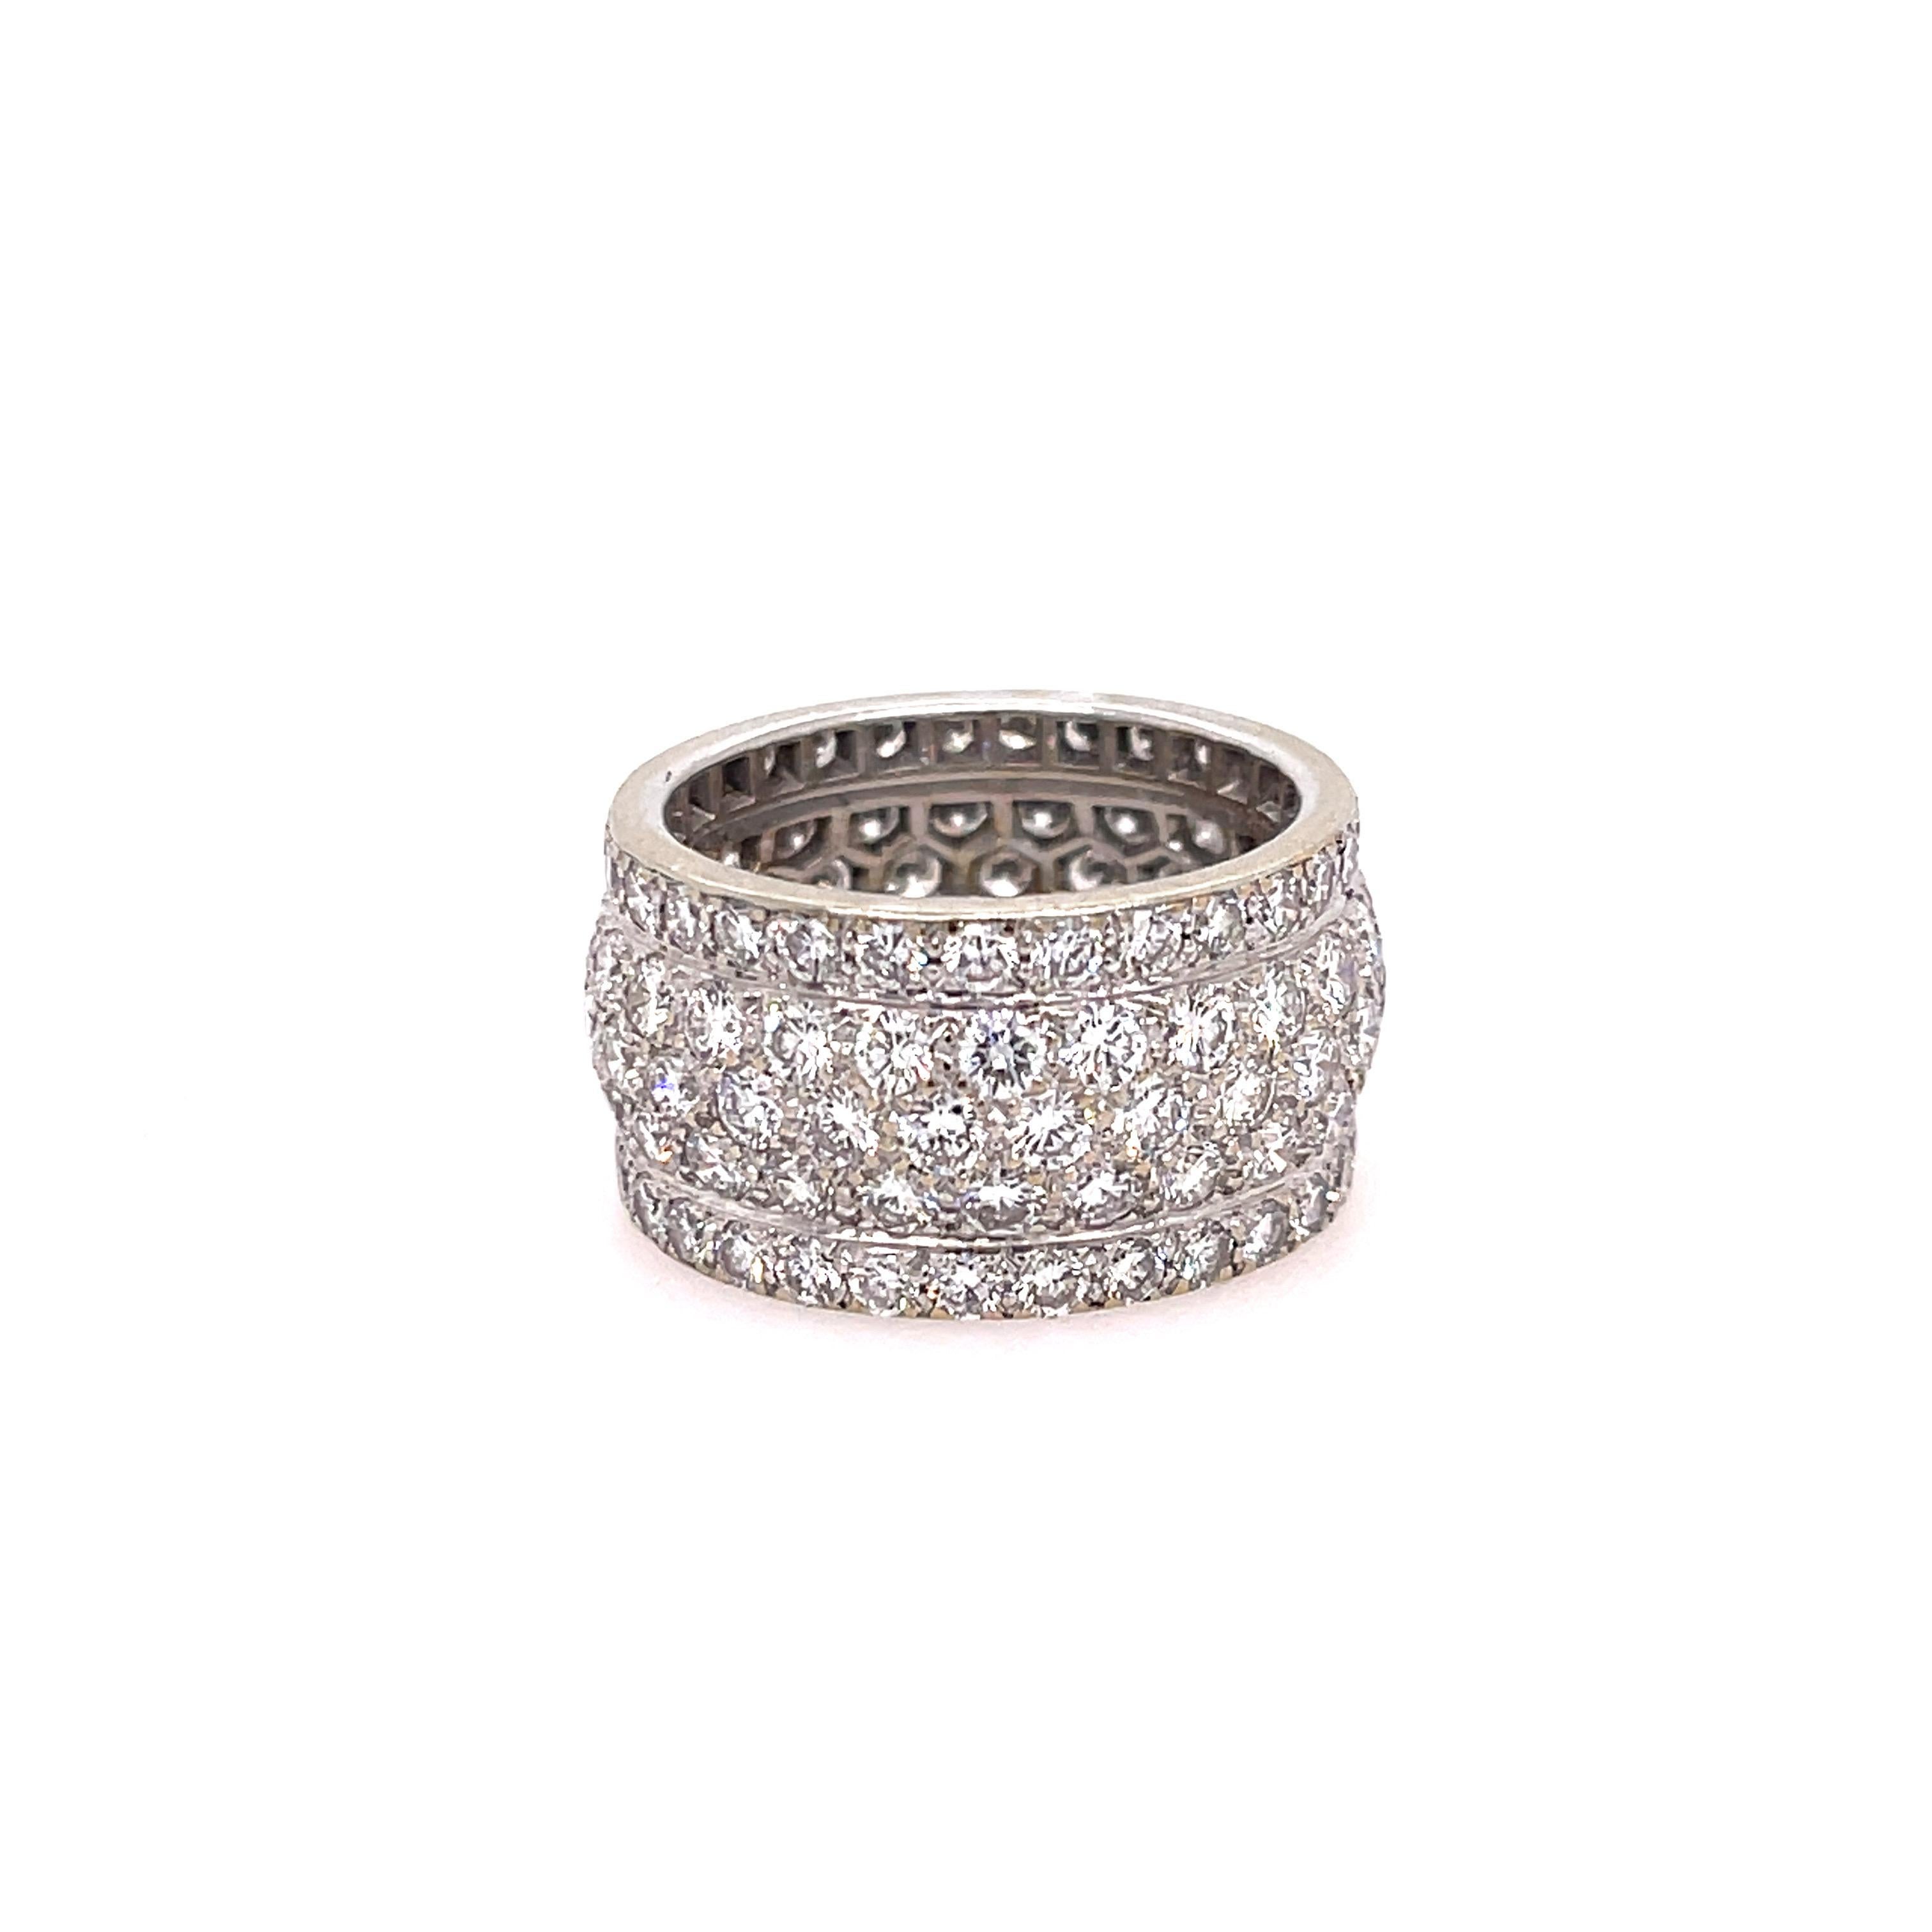 Estate Cartier Nigeria Diamond Band 18K White Gold. The ring features approximately  5.50ctw of brilliant round cut diamonds (F-G color, VVS-VS1 clarity). Stamped with French hallmarks and Cartier 750. Finger size 7.5, ring cannot be sized.